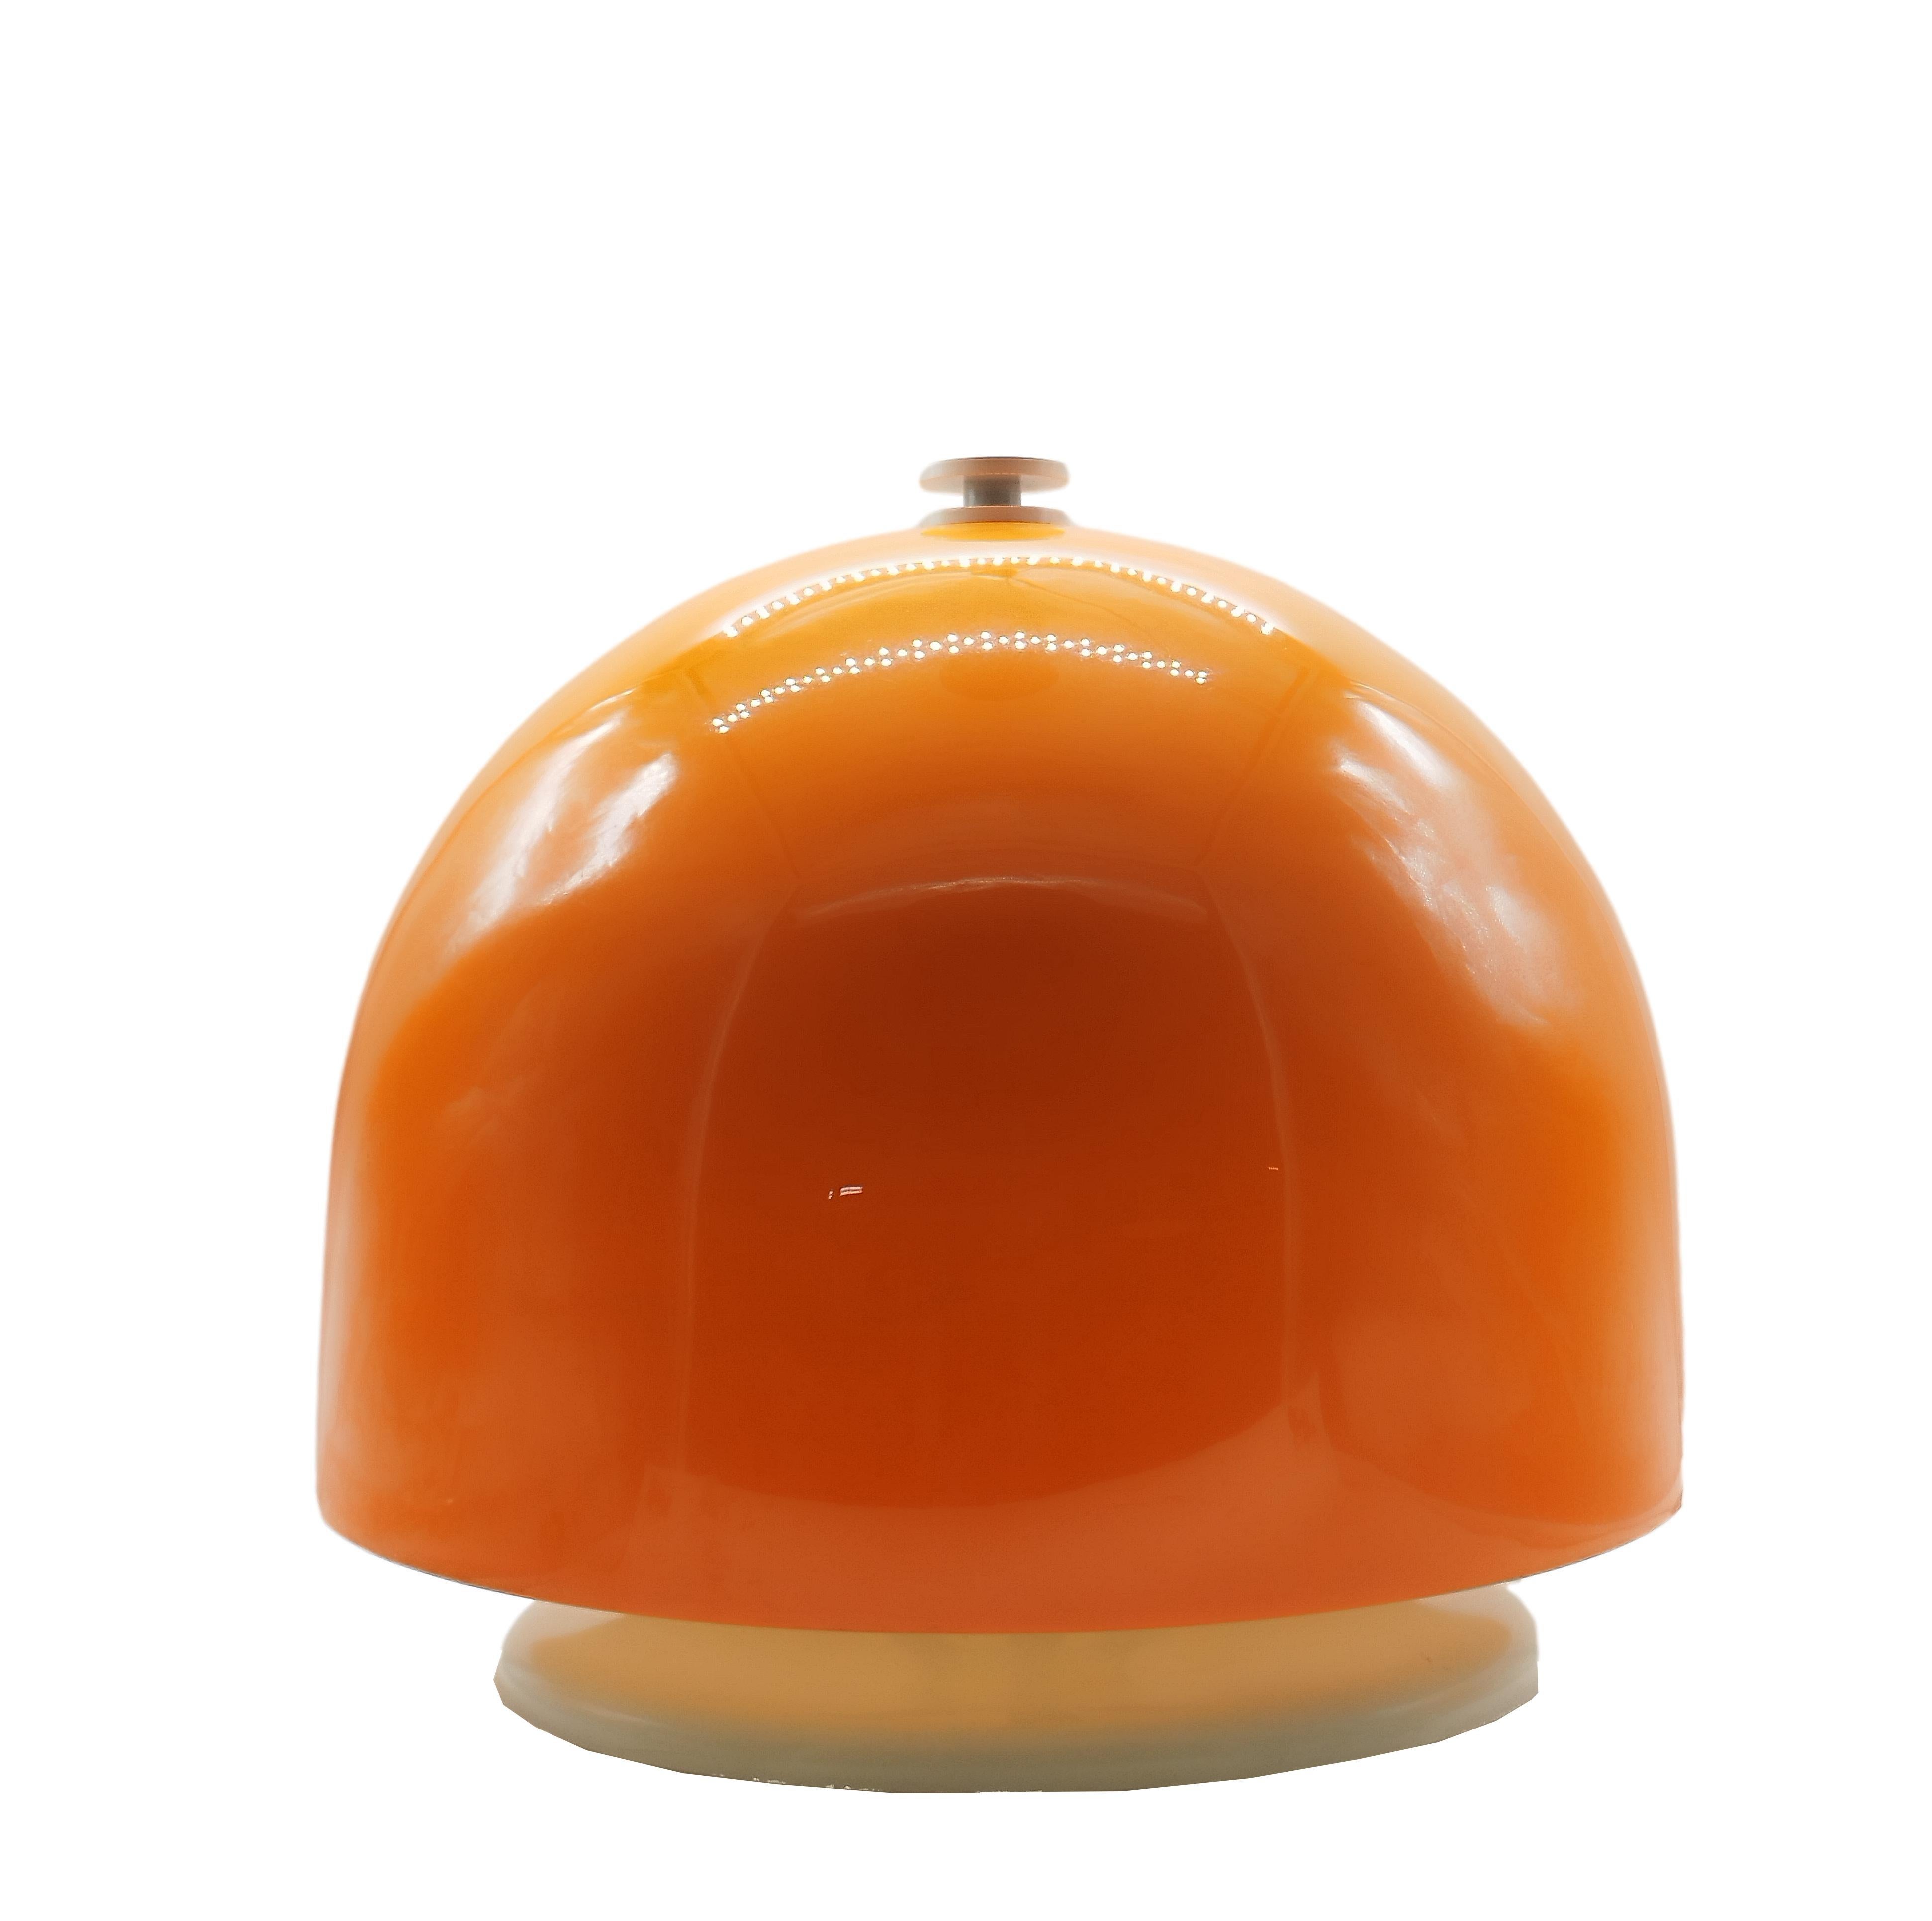 Space mushroom-shaped table lamp composed of an oversized domed shade of orange acrylic supported by a circular base of white painted metal.  Attrib. to Elio Martinelli for Martinelli Luce.
Very good vintage condition.